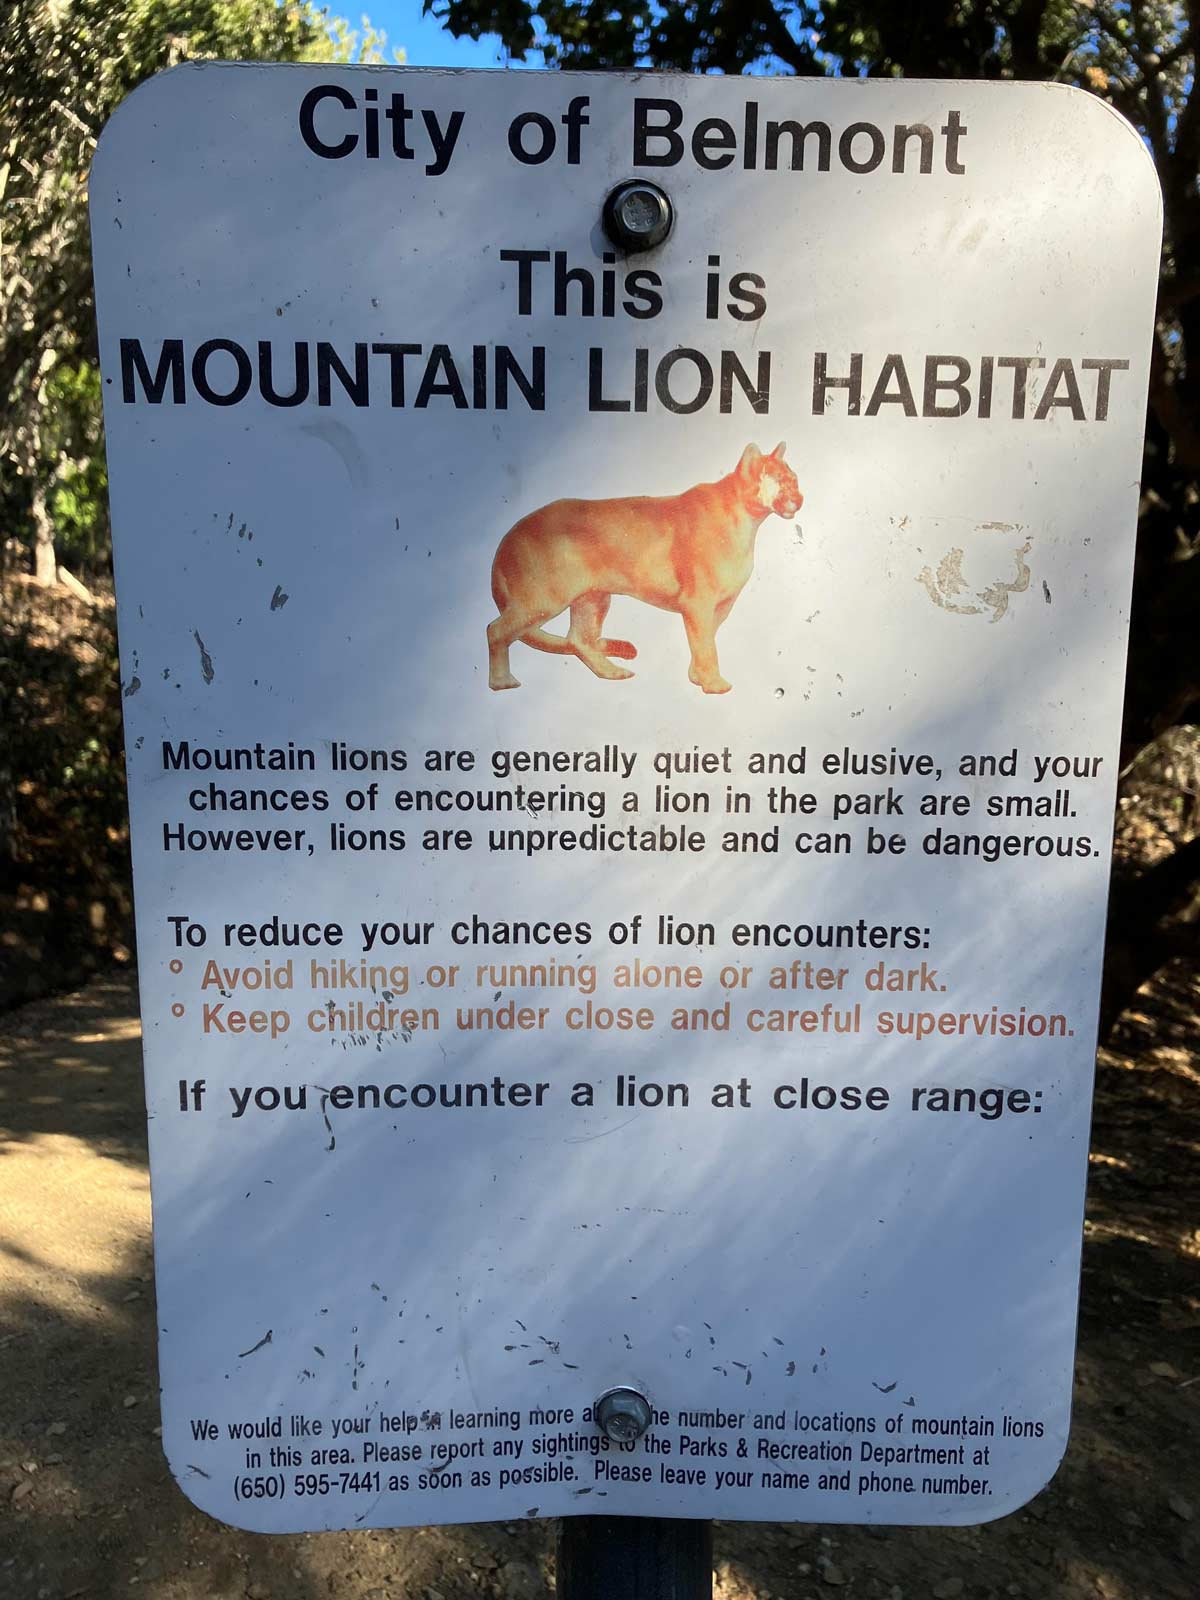 If you encounter a lion at close range